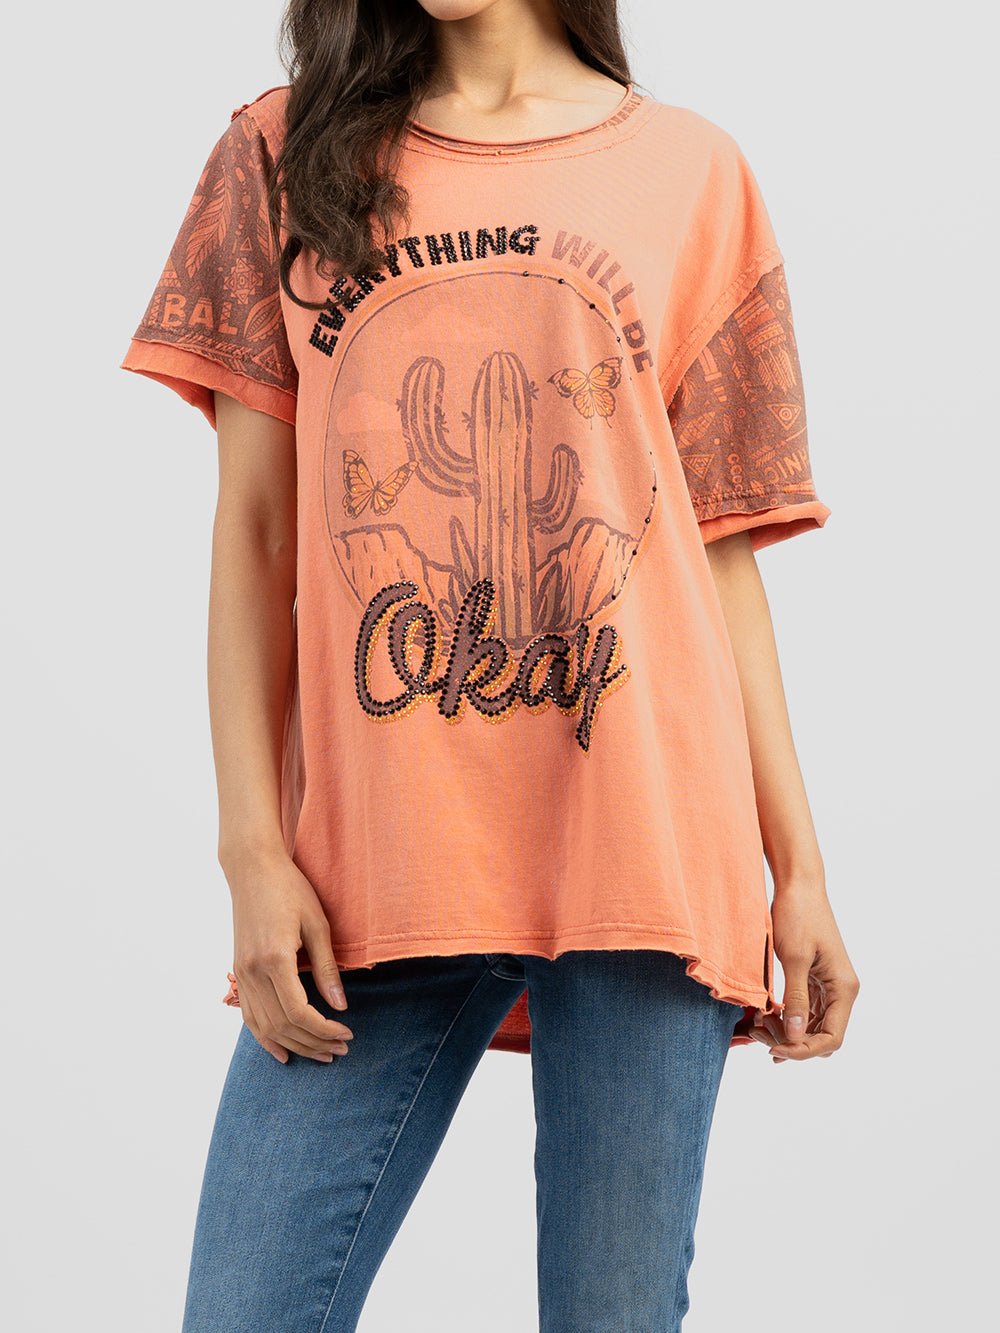 Women's Mineral Wash 'EVERYTHING WILL BE OKAY' Graphic Tee - Cowgirl Wear